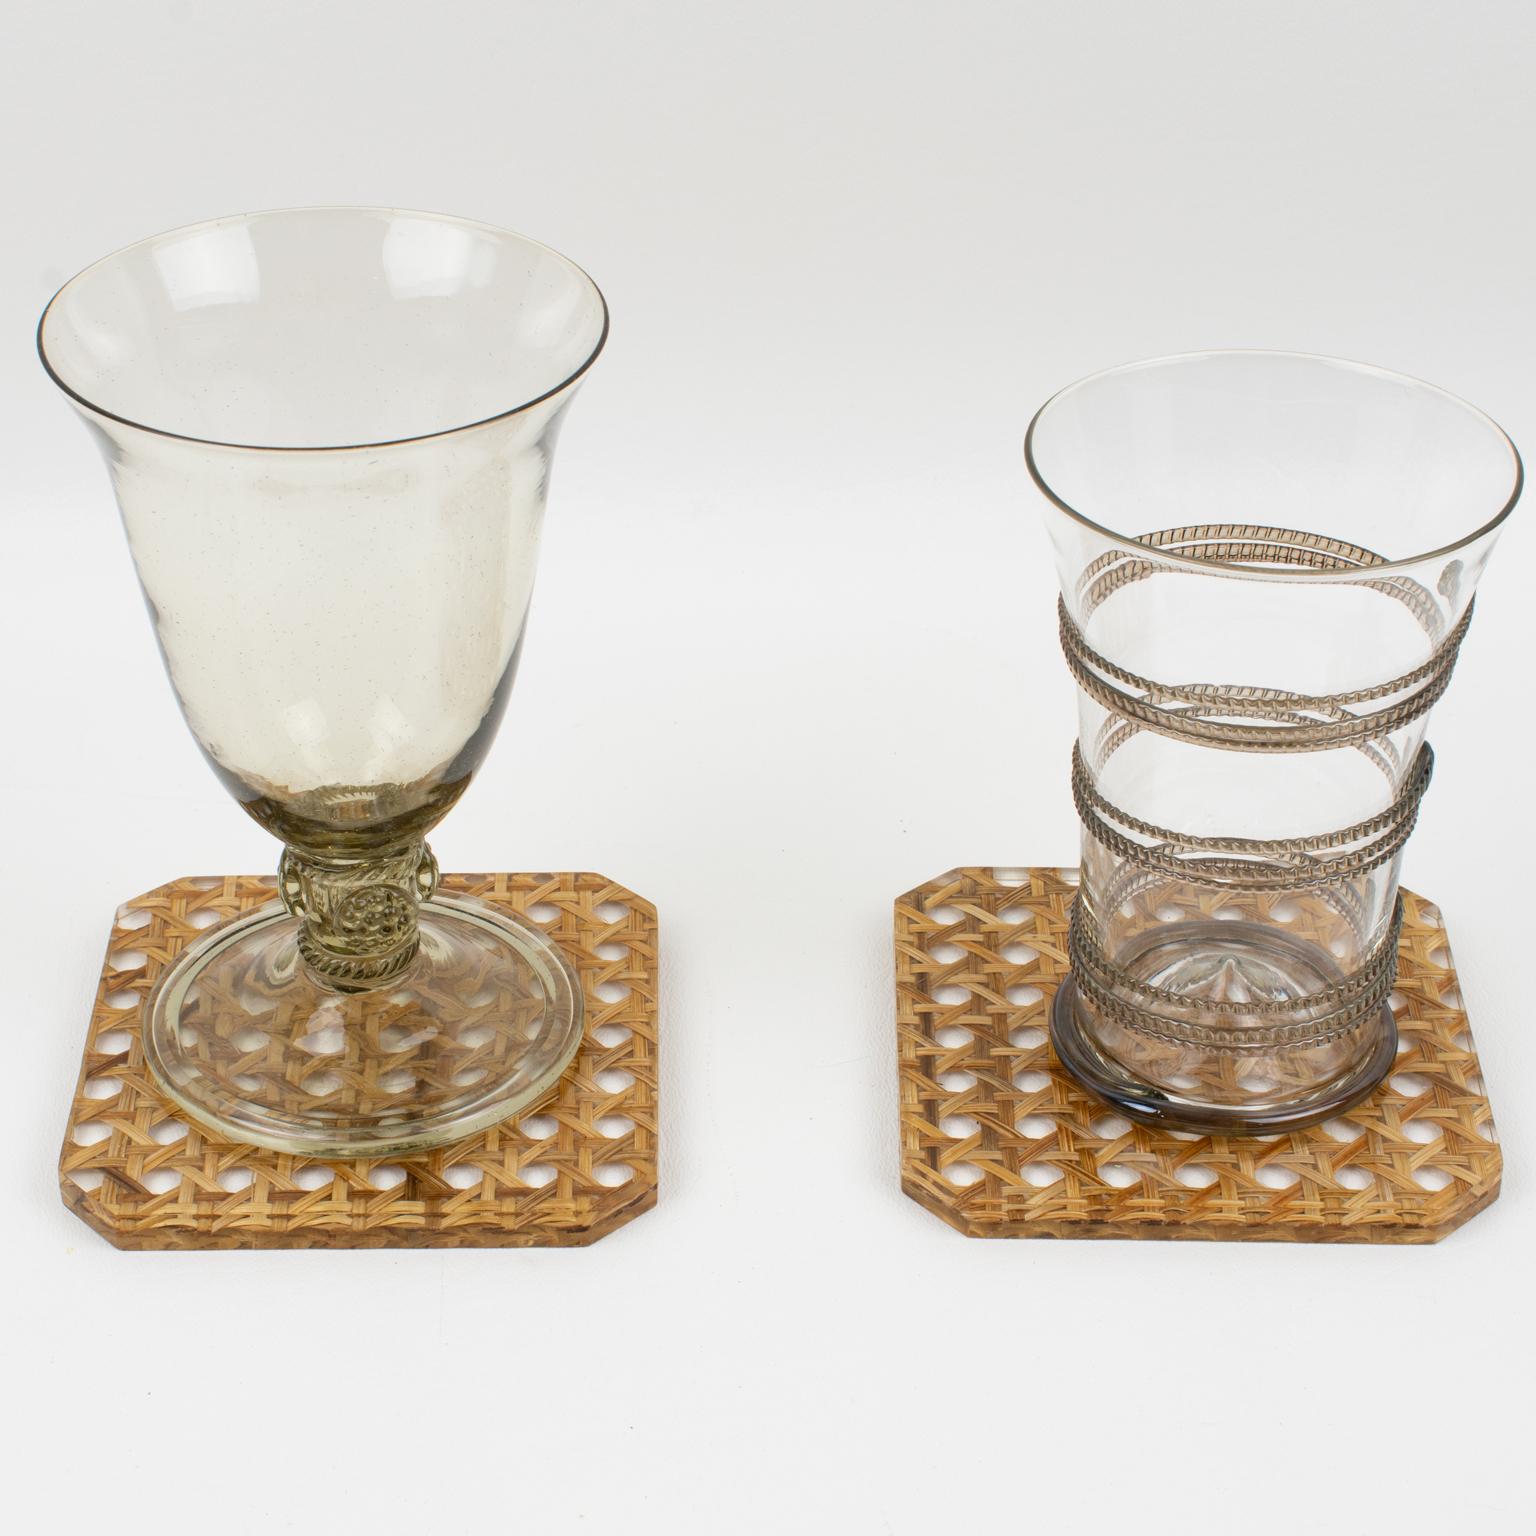 Christian Dior Lucite and Rattan Barware Coaster, 6 pieces 1